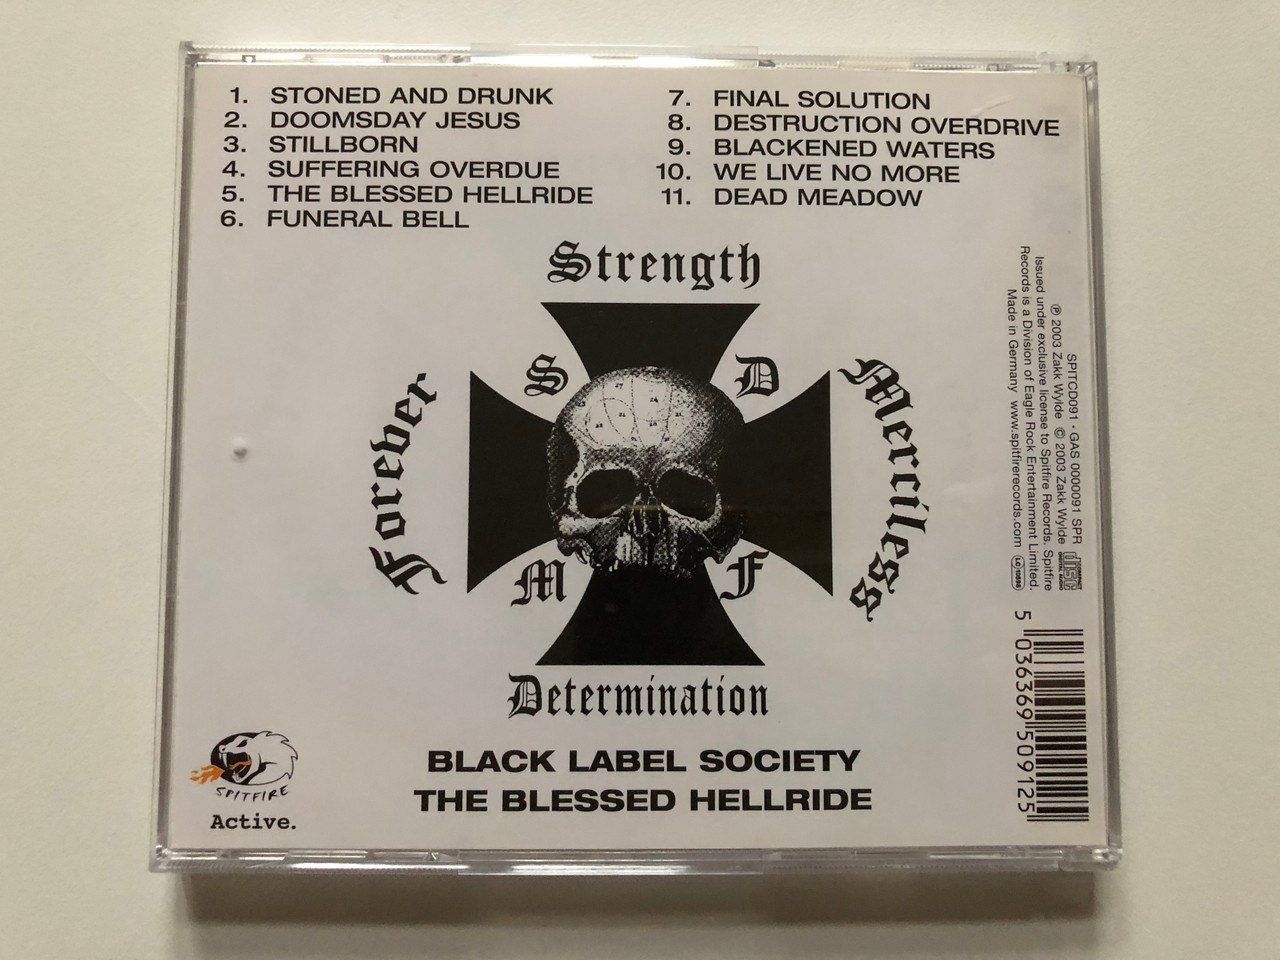 https://cdn10.bigcommerce.com/s-62bdpkt7pb/products/0/images/312875/Black_Label_Society_The_Blessed_Hellride_Spitfire_Records_Audio_CD_2003_SPITCD091_2__24322.1700206965.1280.1280.JPG?c=2